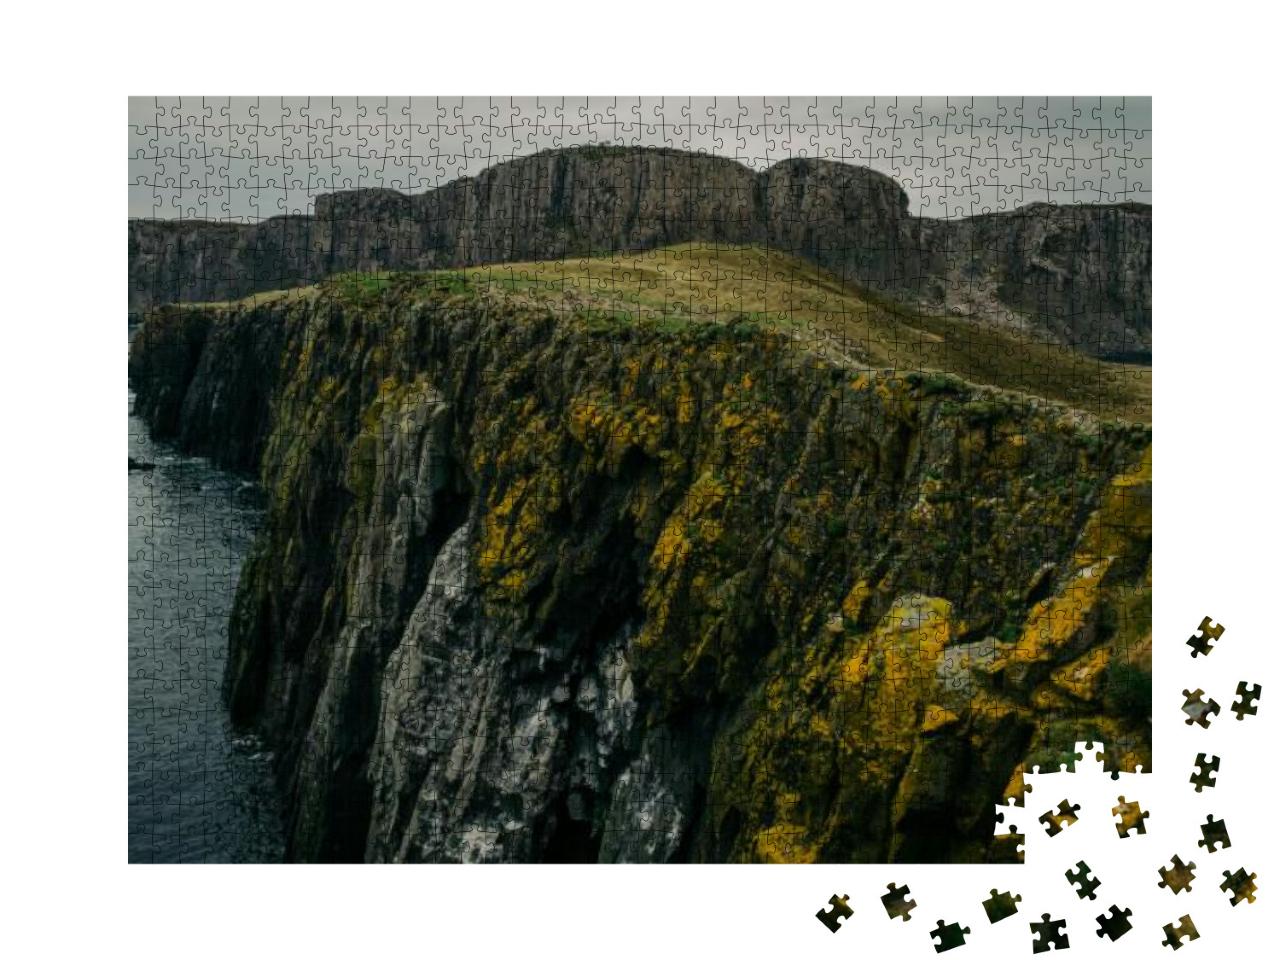 Large Cliffs by the Sea with Green & Orange Moss in the H... Jigsaw Puzzle with 1000 pieces